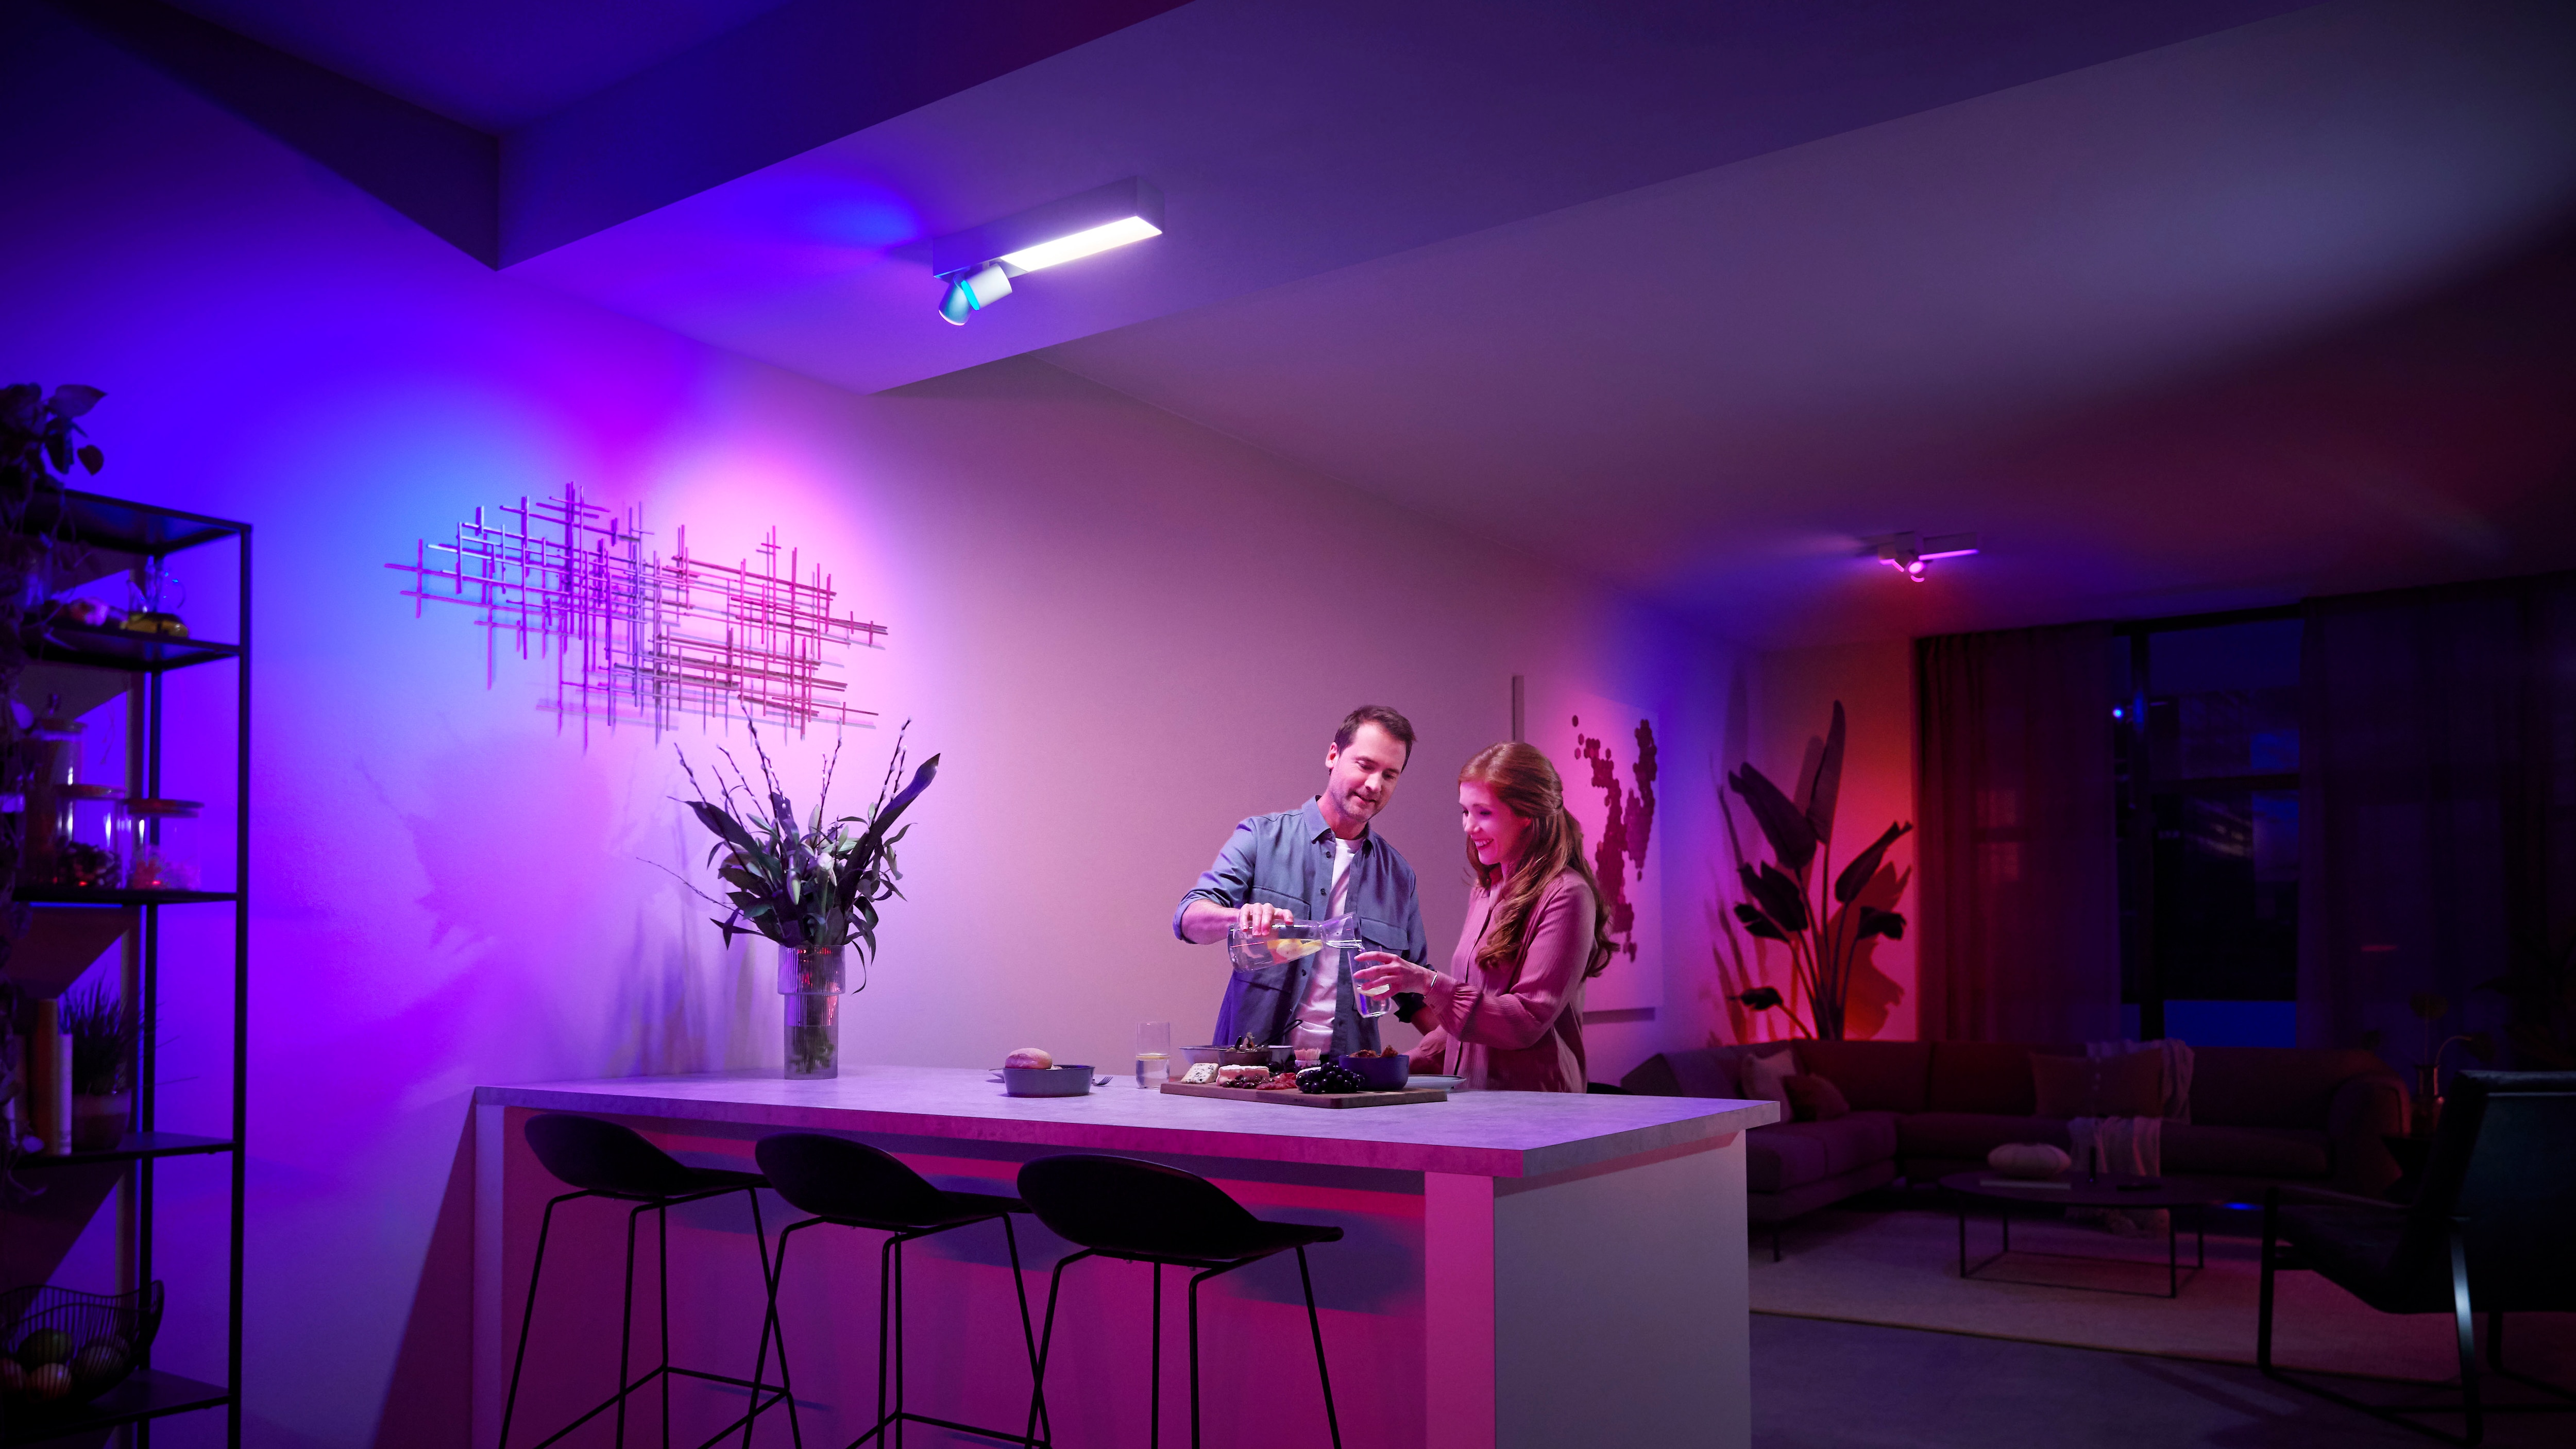 Watt myself suitcase Philips Hue adds brightest bulb | Signify Company Website